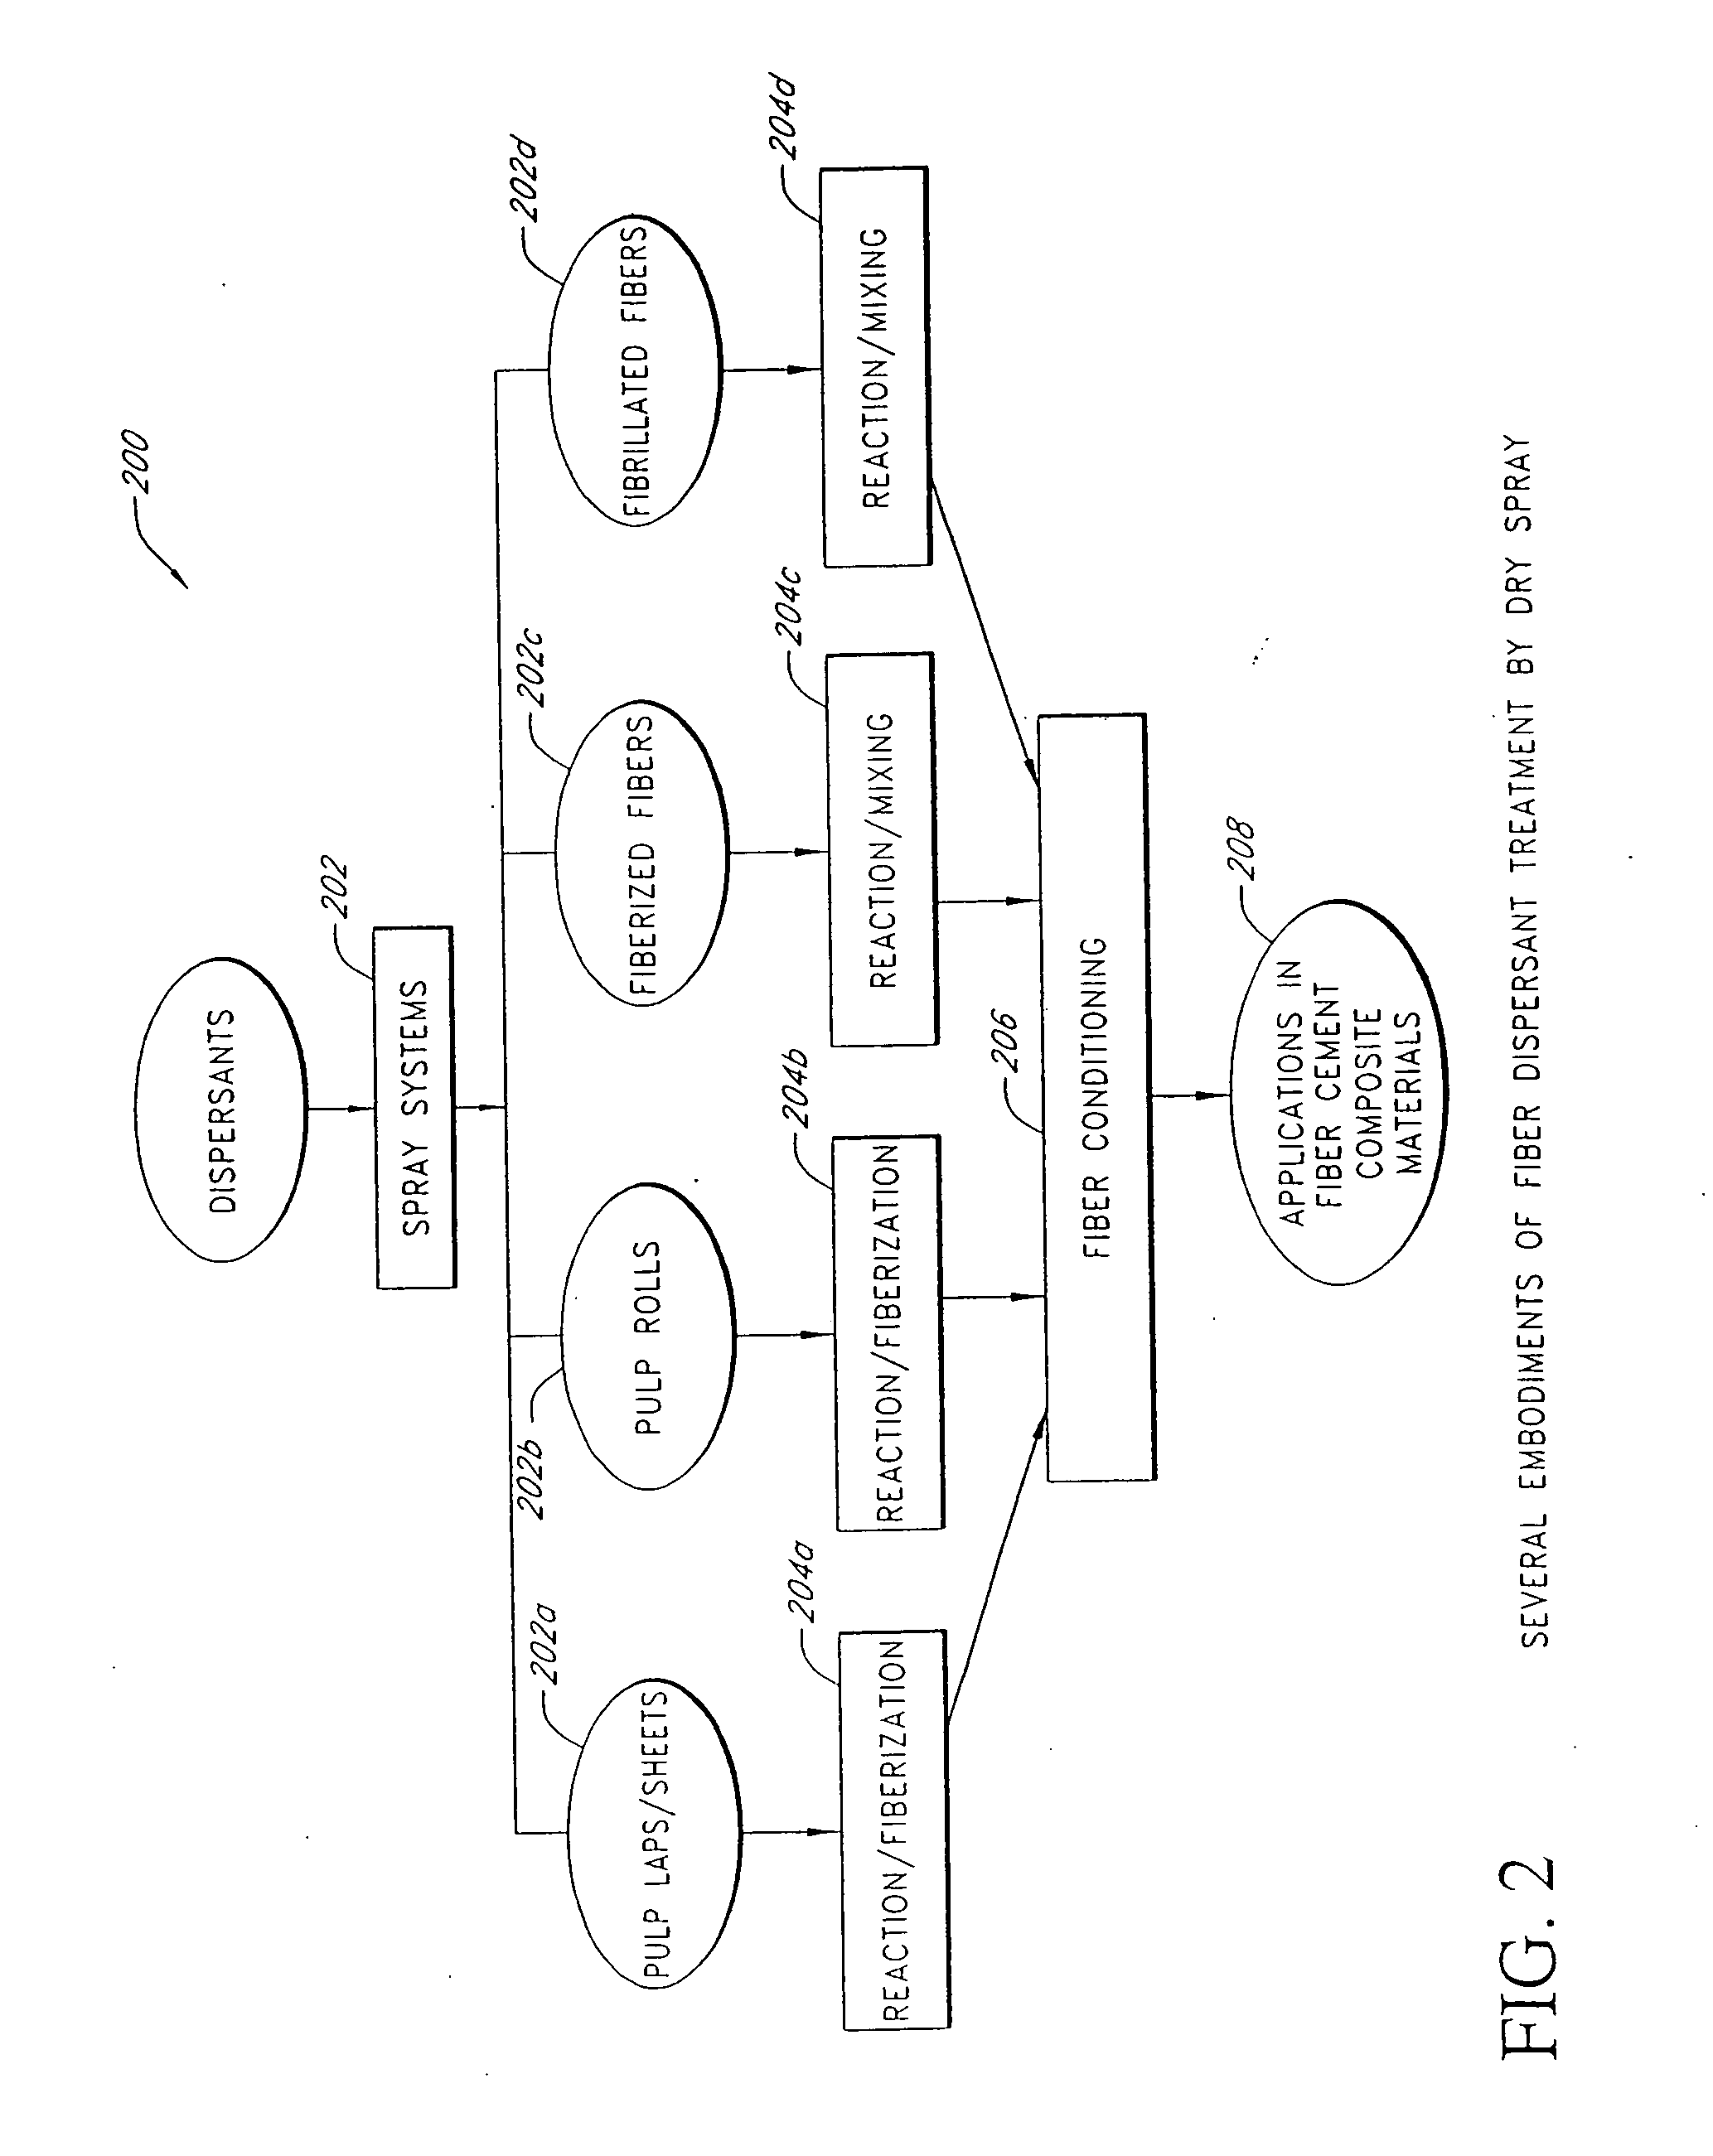 Fiber reinforced cement composite materials using chemically treated fibers with improved dispersibility